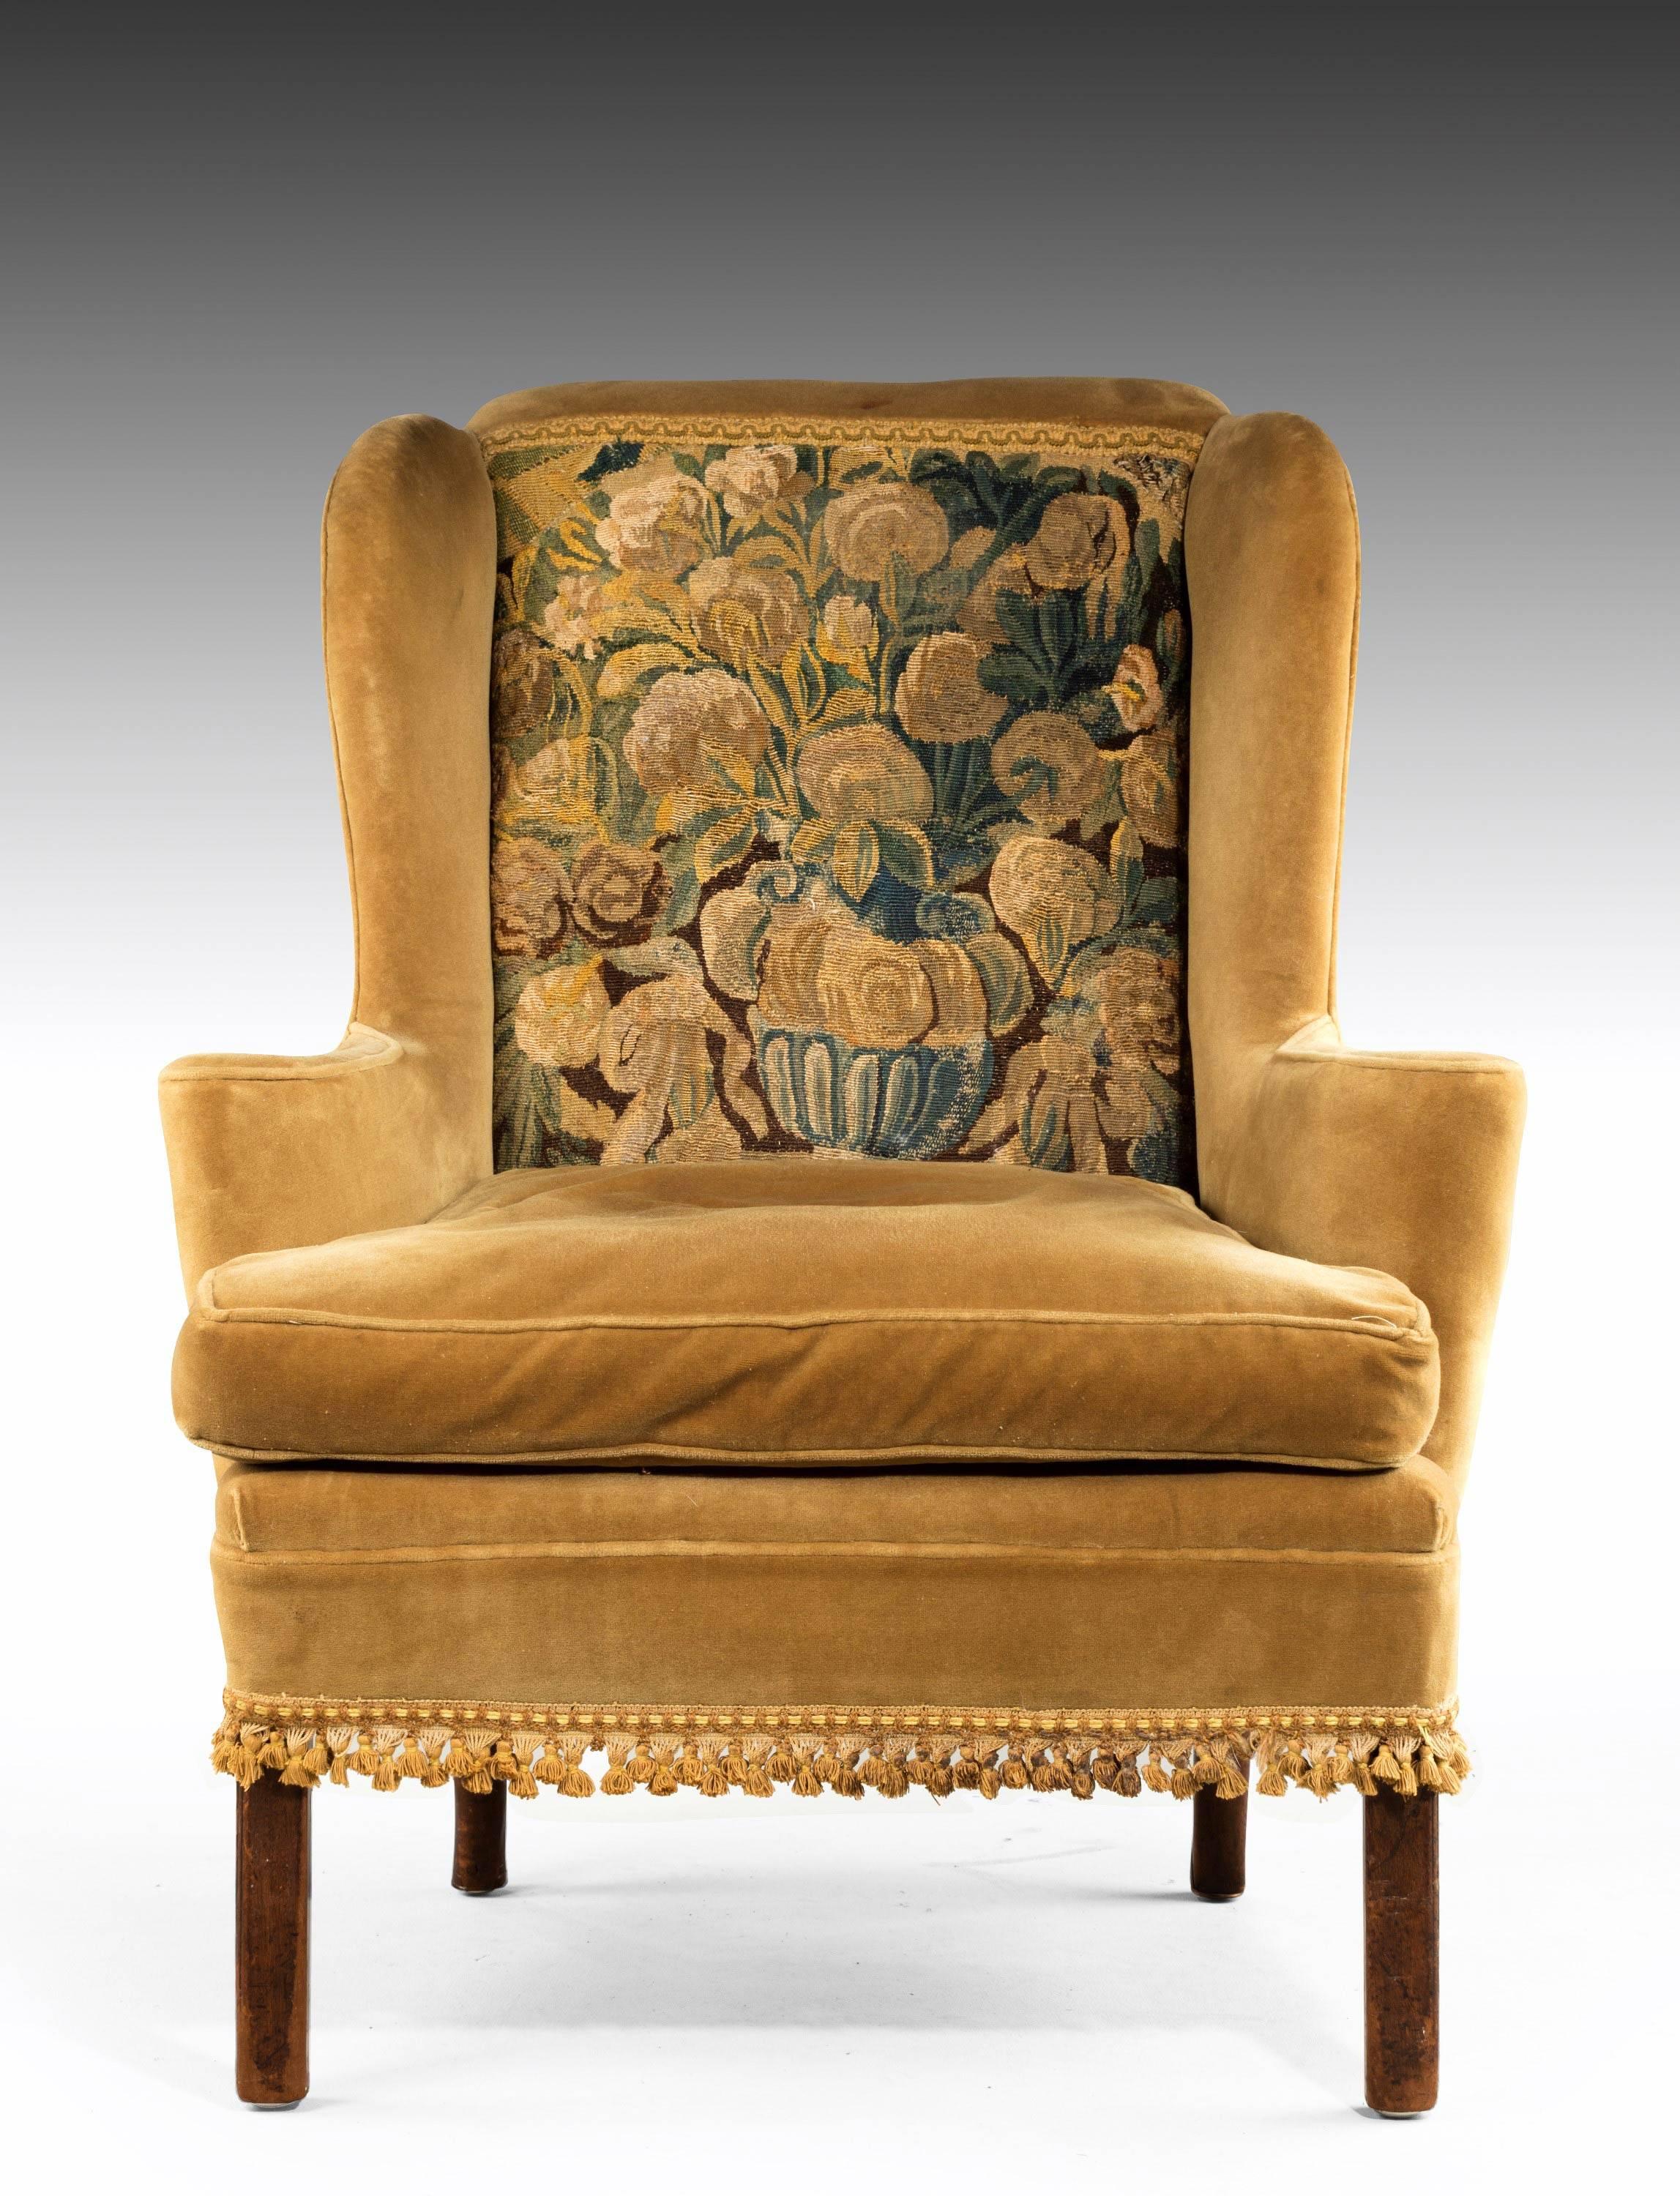 Mid-18th Century George III Period Wing Chair Incorporating a Verdure Tapestry Panel